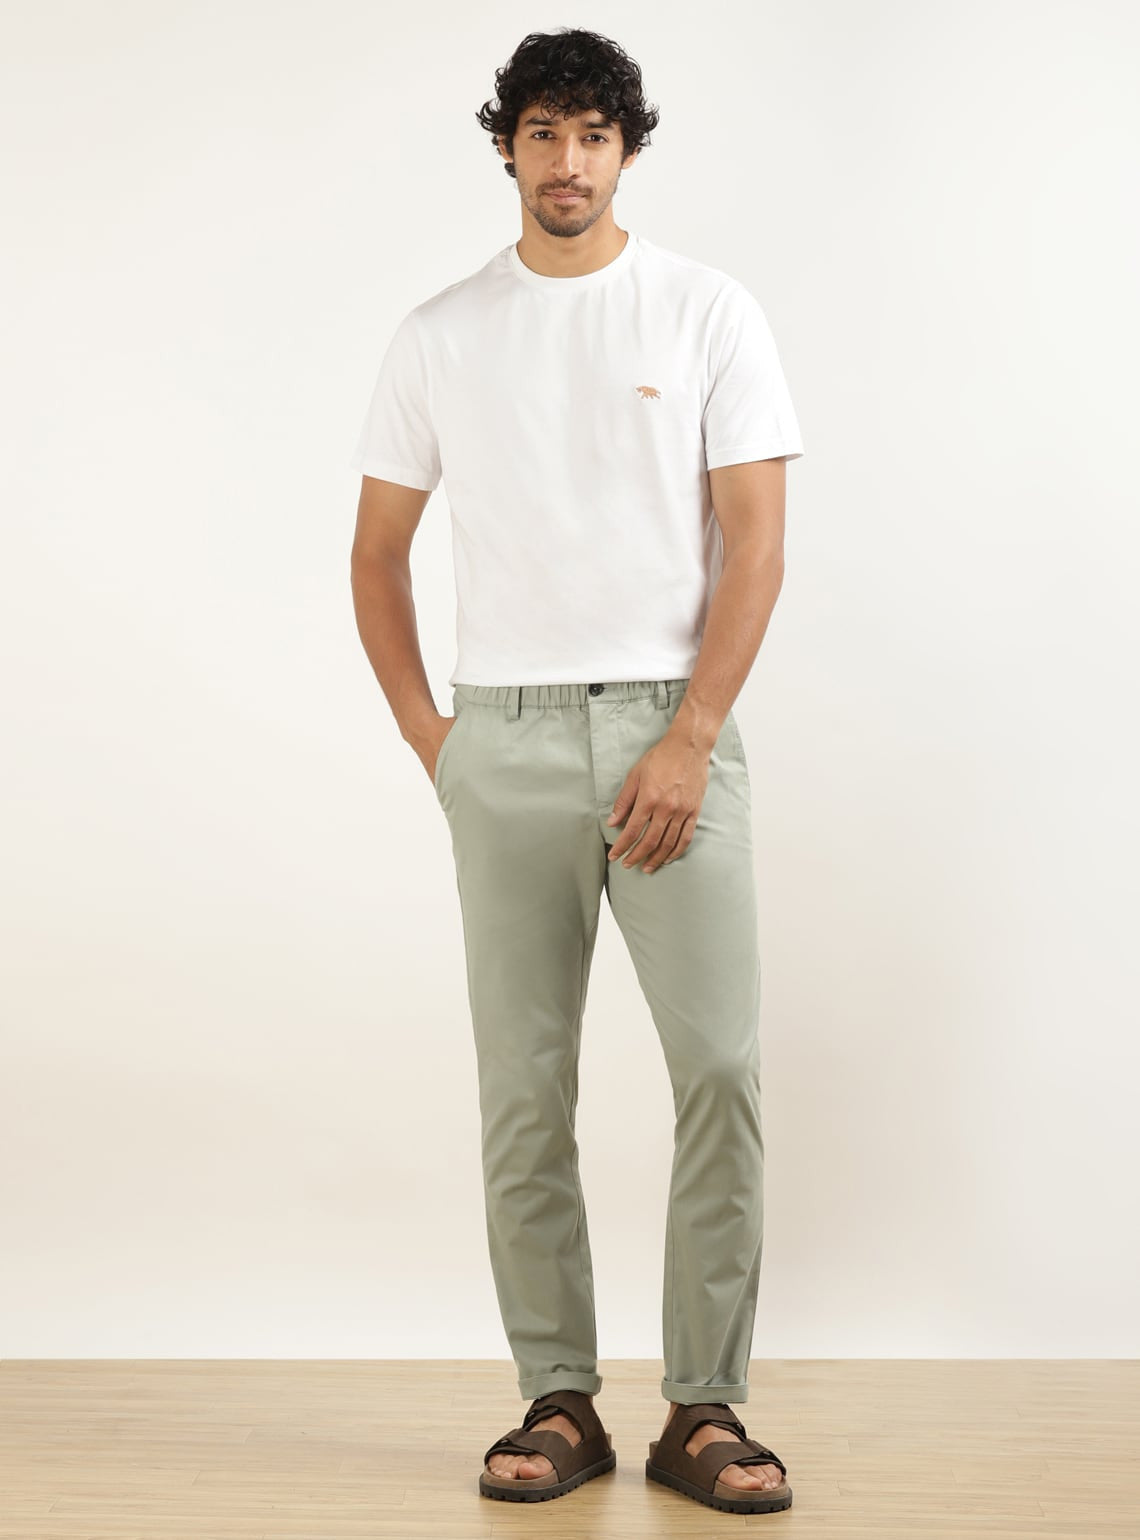 French Clay Trouser